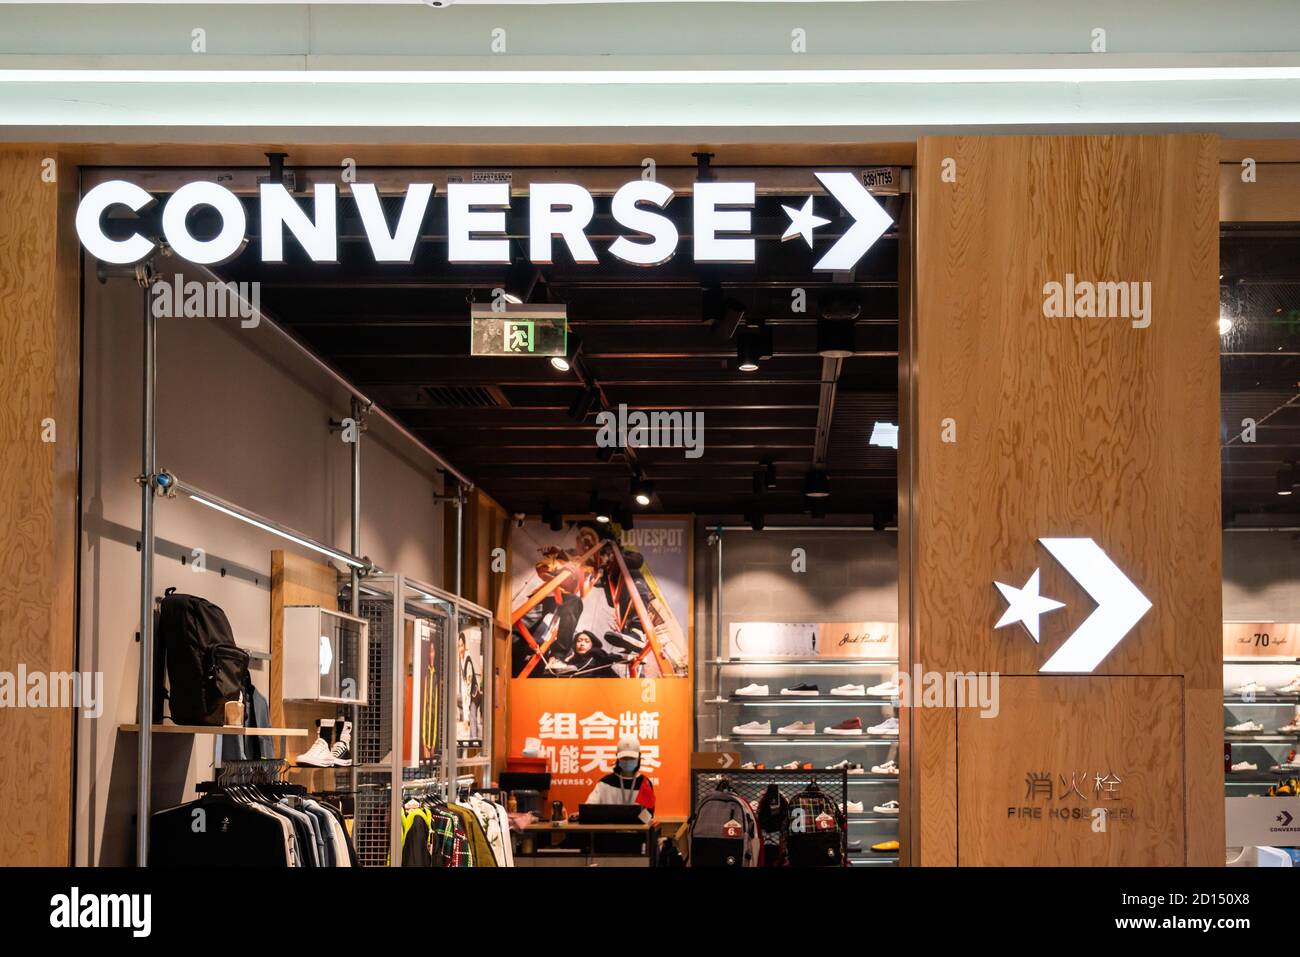 Converse Store High Resolution Stock Photography and Images - Alamy